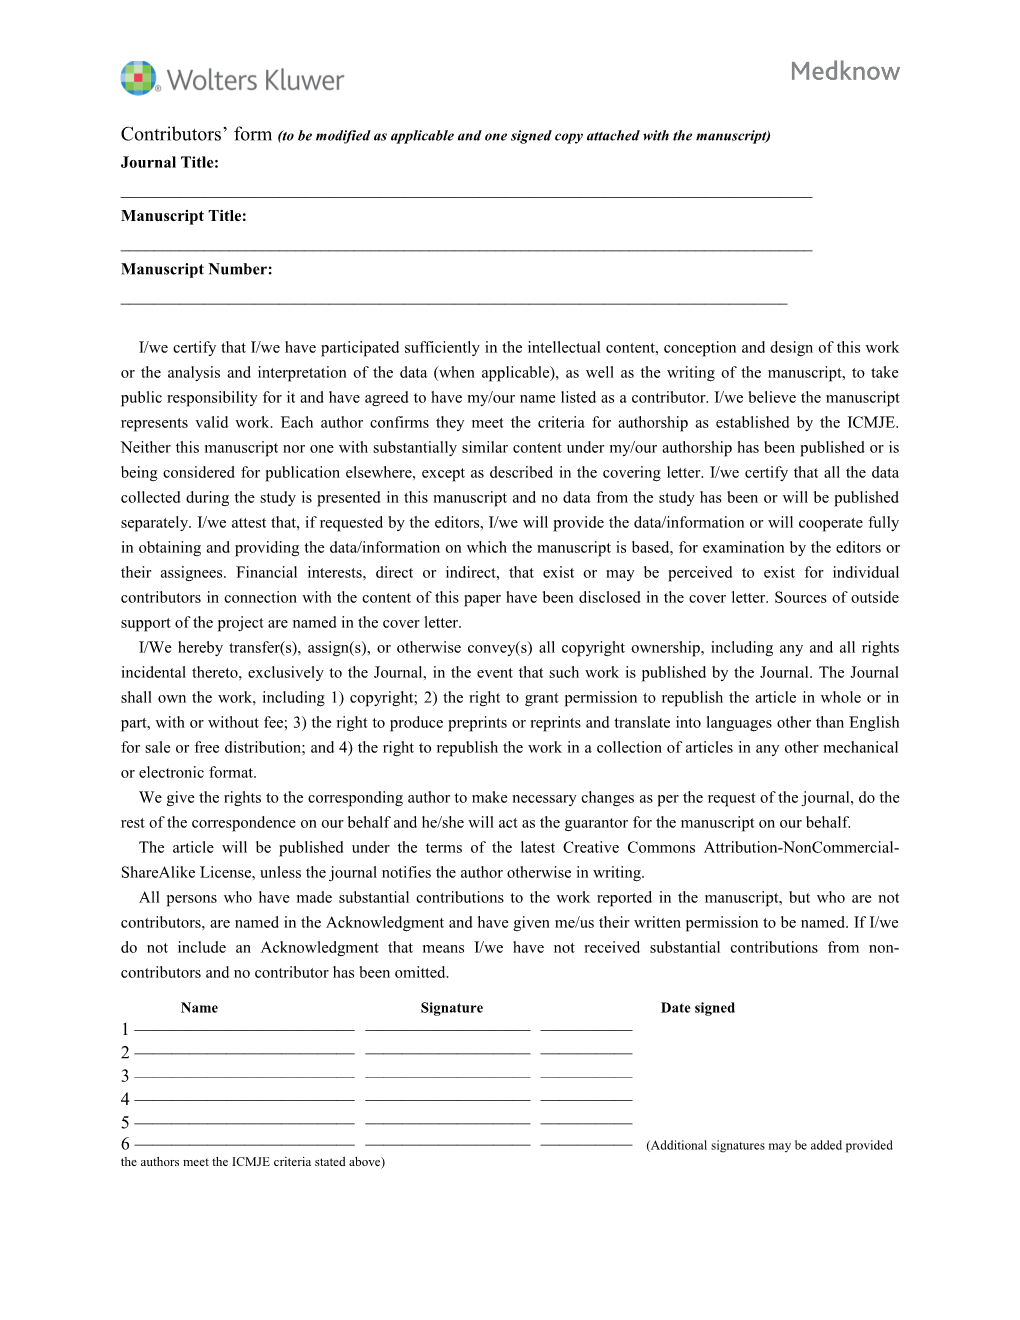 Contributors Form (To Be Modified As Applicable and One Signed Copy Attached with The s1